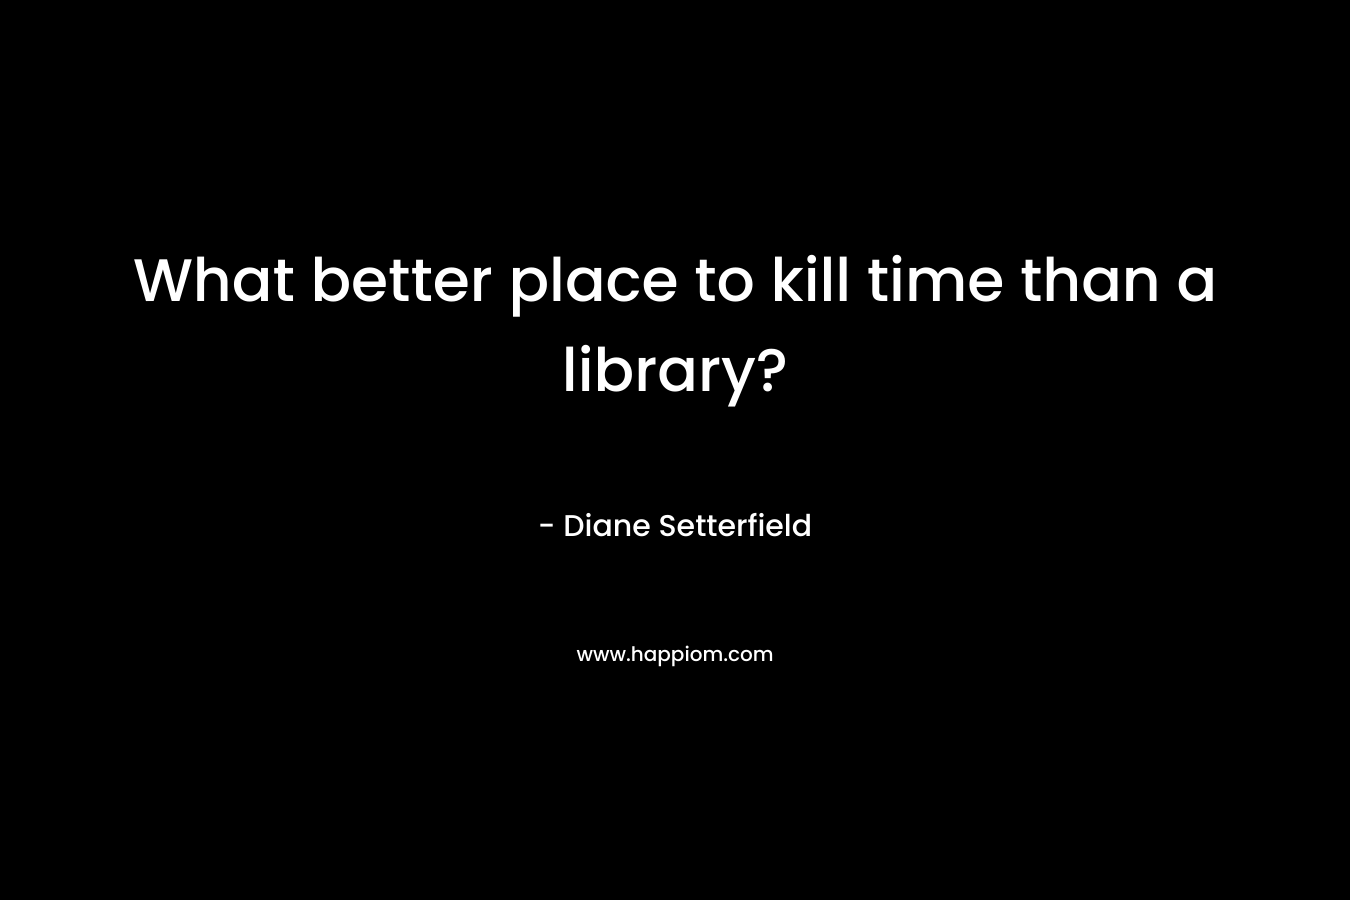 What better place to kill time than a library?